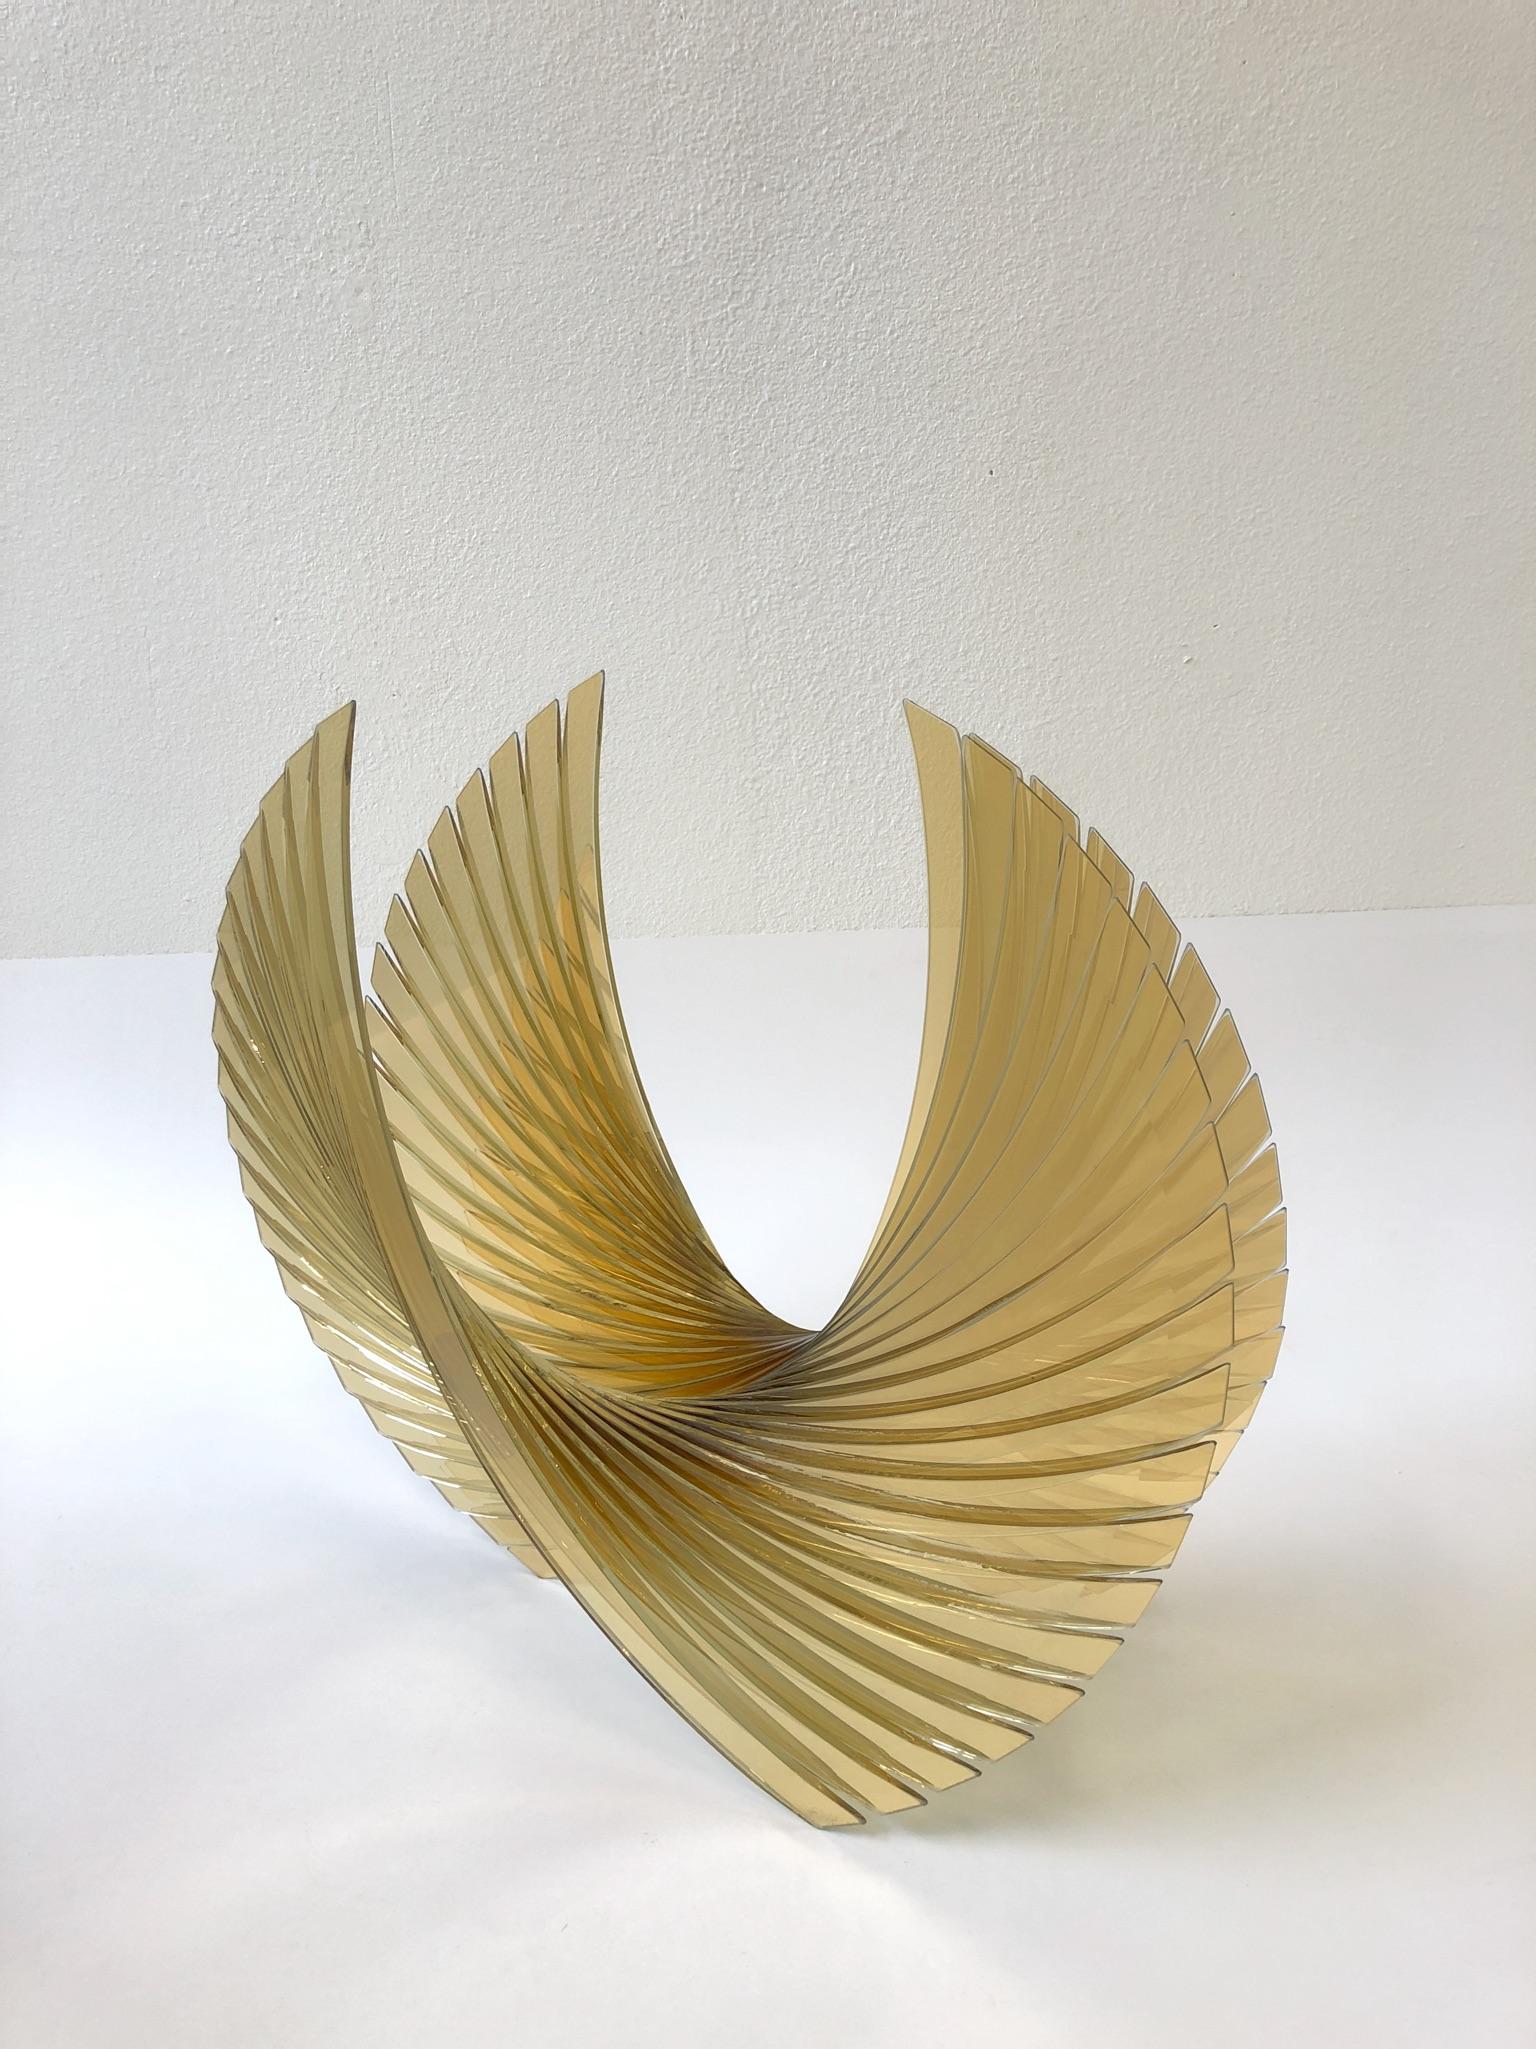 A spectacular amber hand cut-glass sculpture “Gold Amber Wings” by Tom Marosz.
The sculptor hand-cuts and bevelled the edges. The sculpture is signed and dated 2005.
Dimensions: 22” high 9” deep 24” wide.